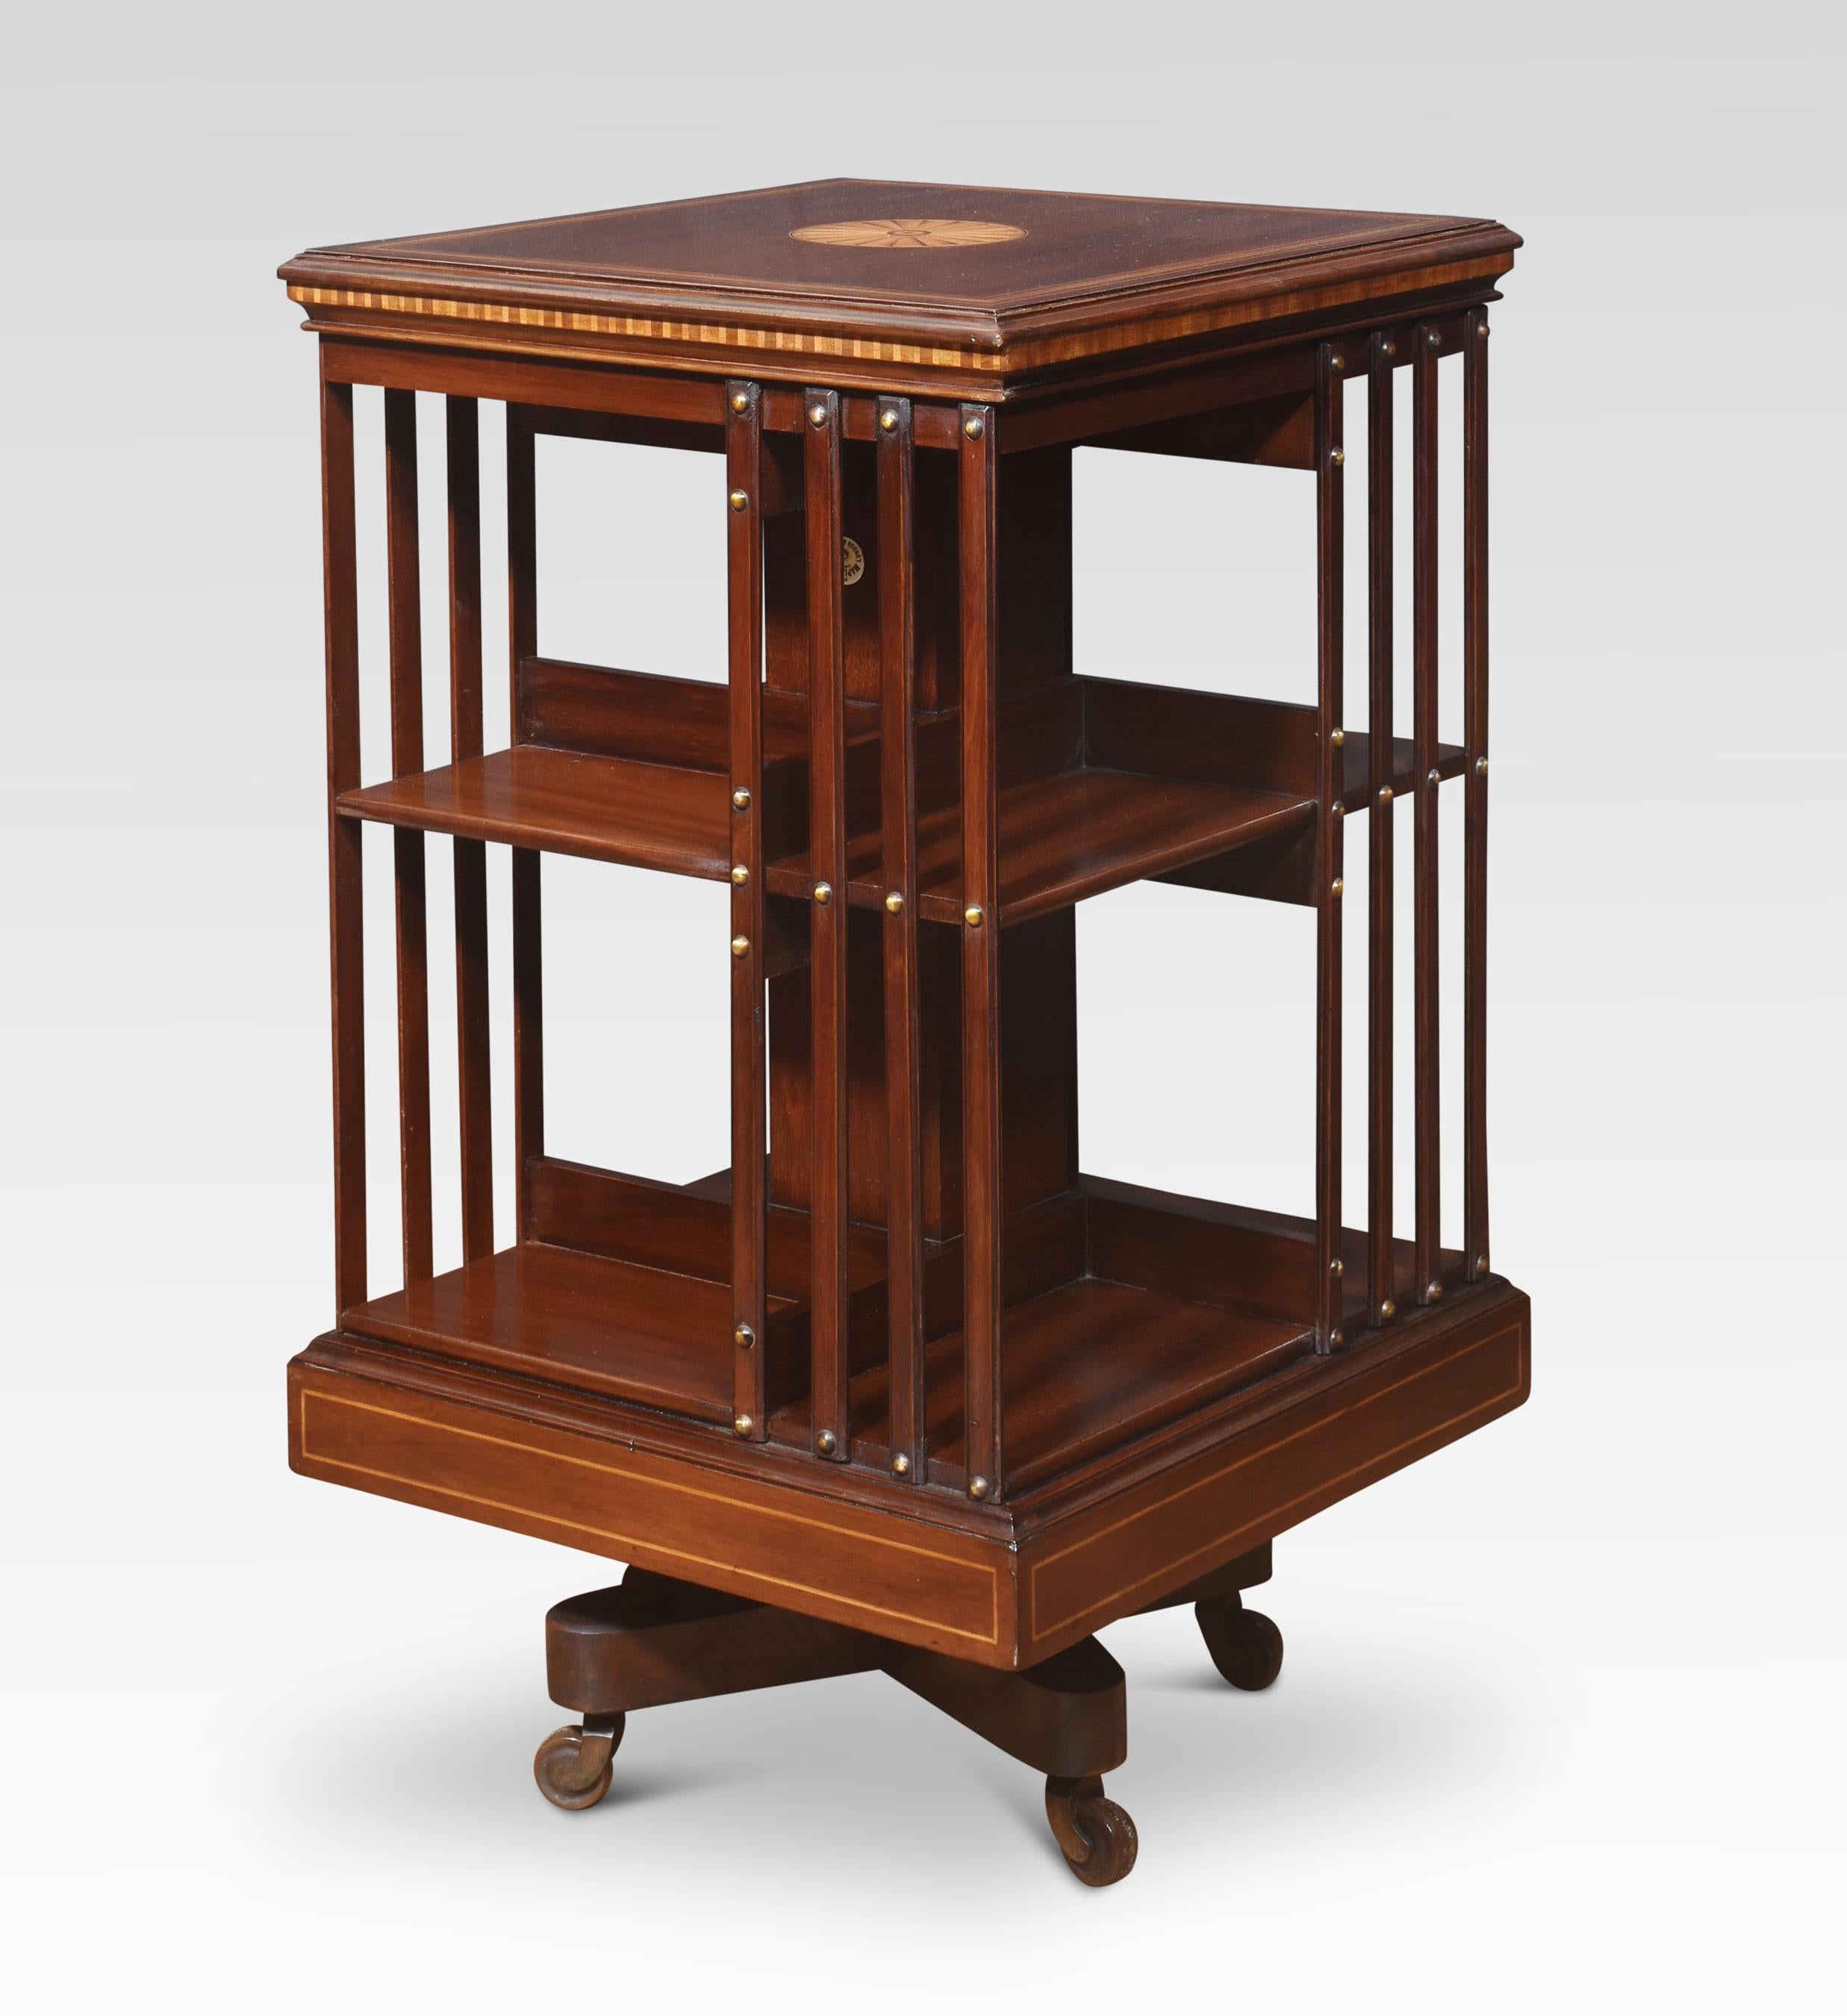 Pair of Maple & Co revolving bookcases. The well-figured mahogany and satinwood banded tops with central fan inlay, above an arrangement of shelves raised up on a cruciform base with castors.
Dimensions
Height 34.5 Inches
Width 20 Inches
Depth 20